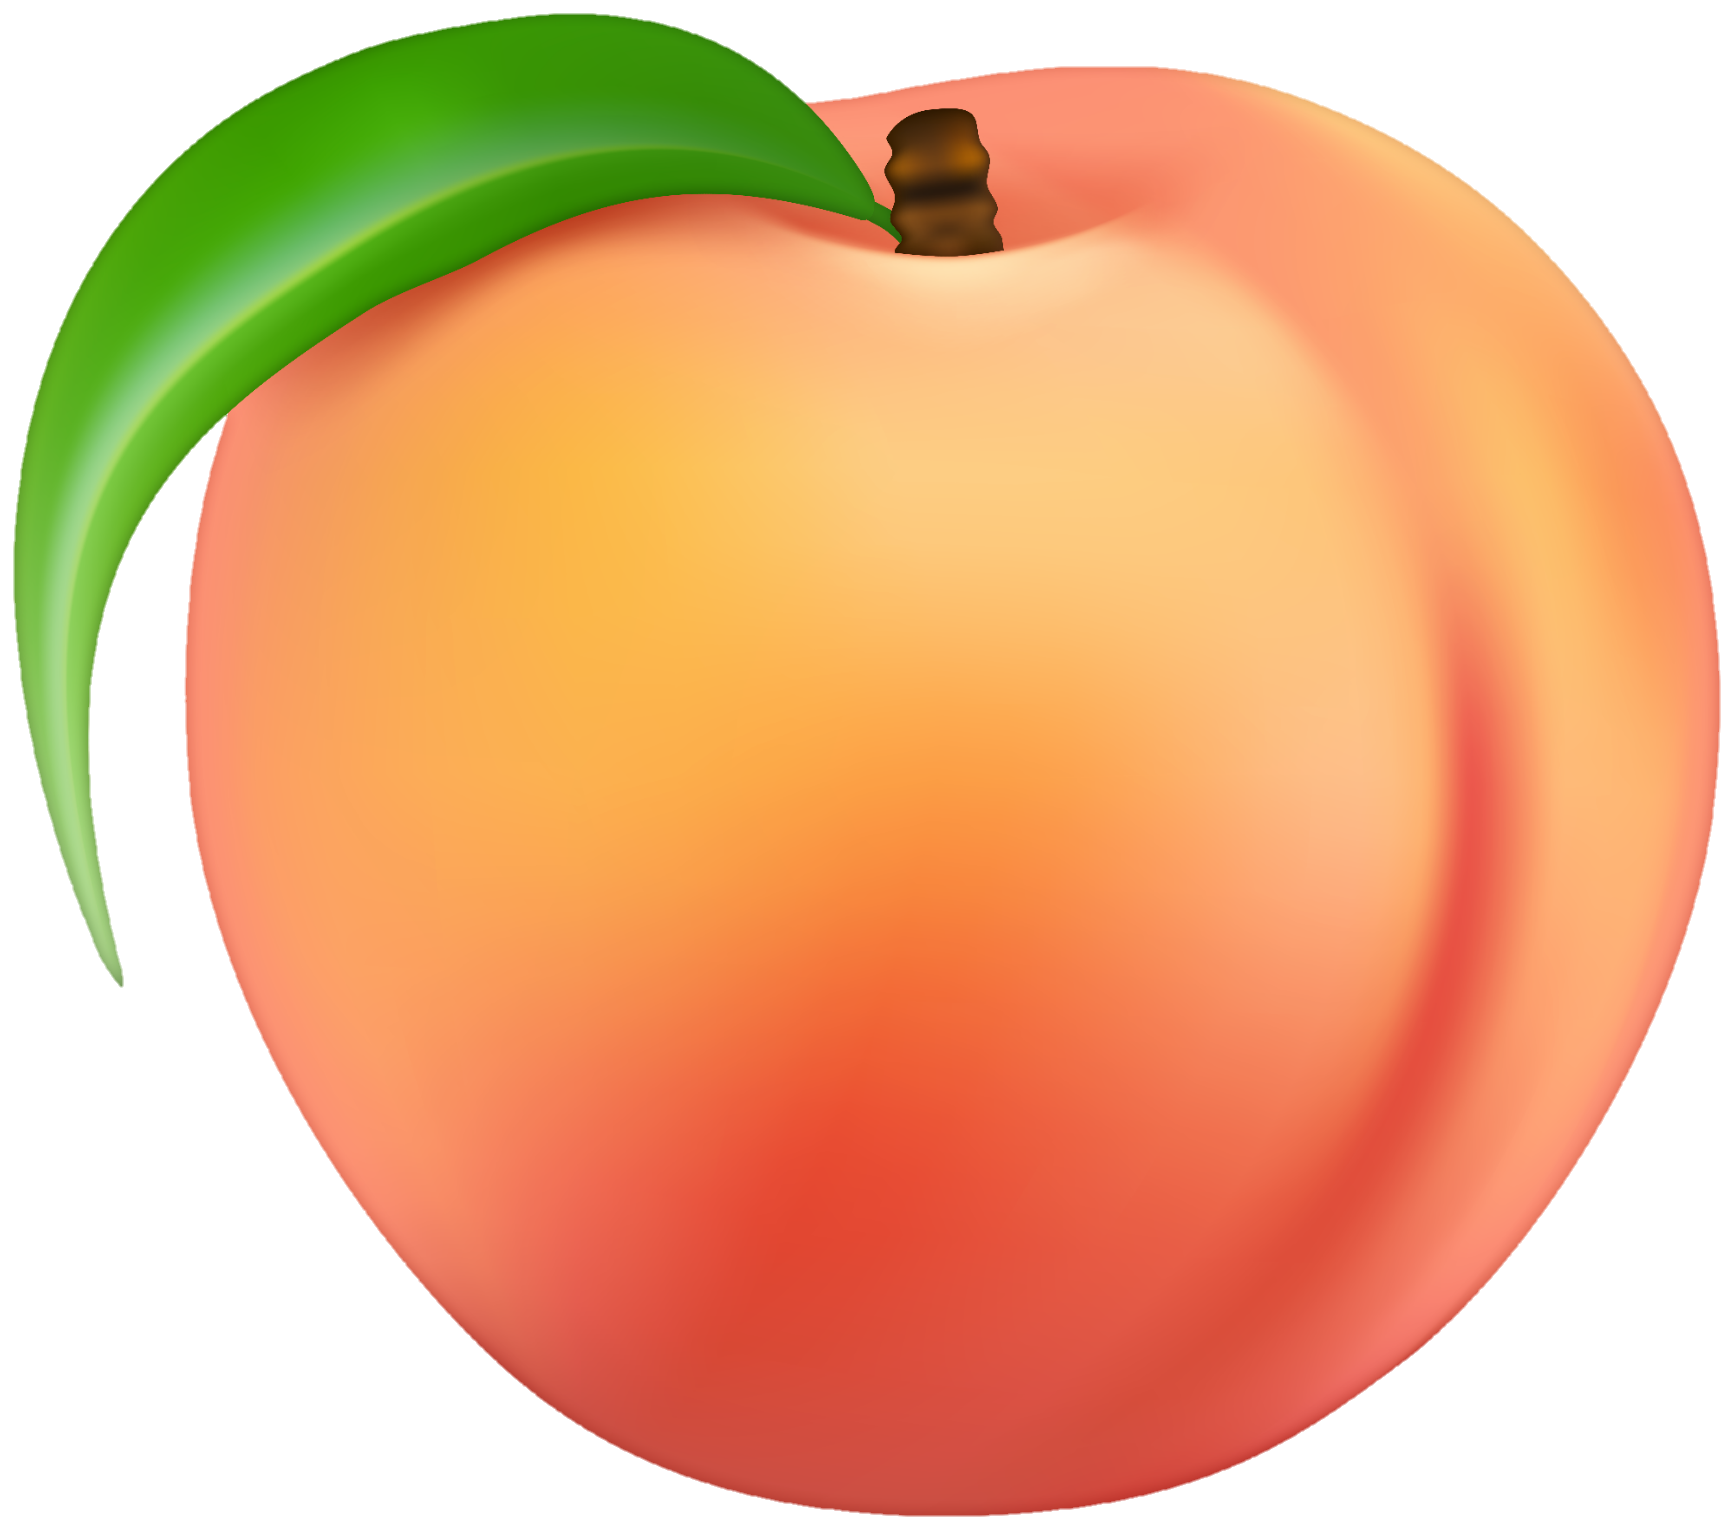 peach-png-image-from-pngfre-32